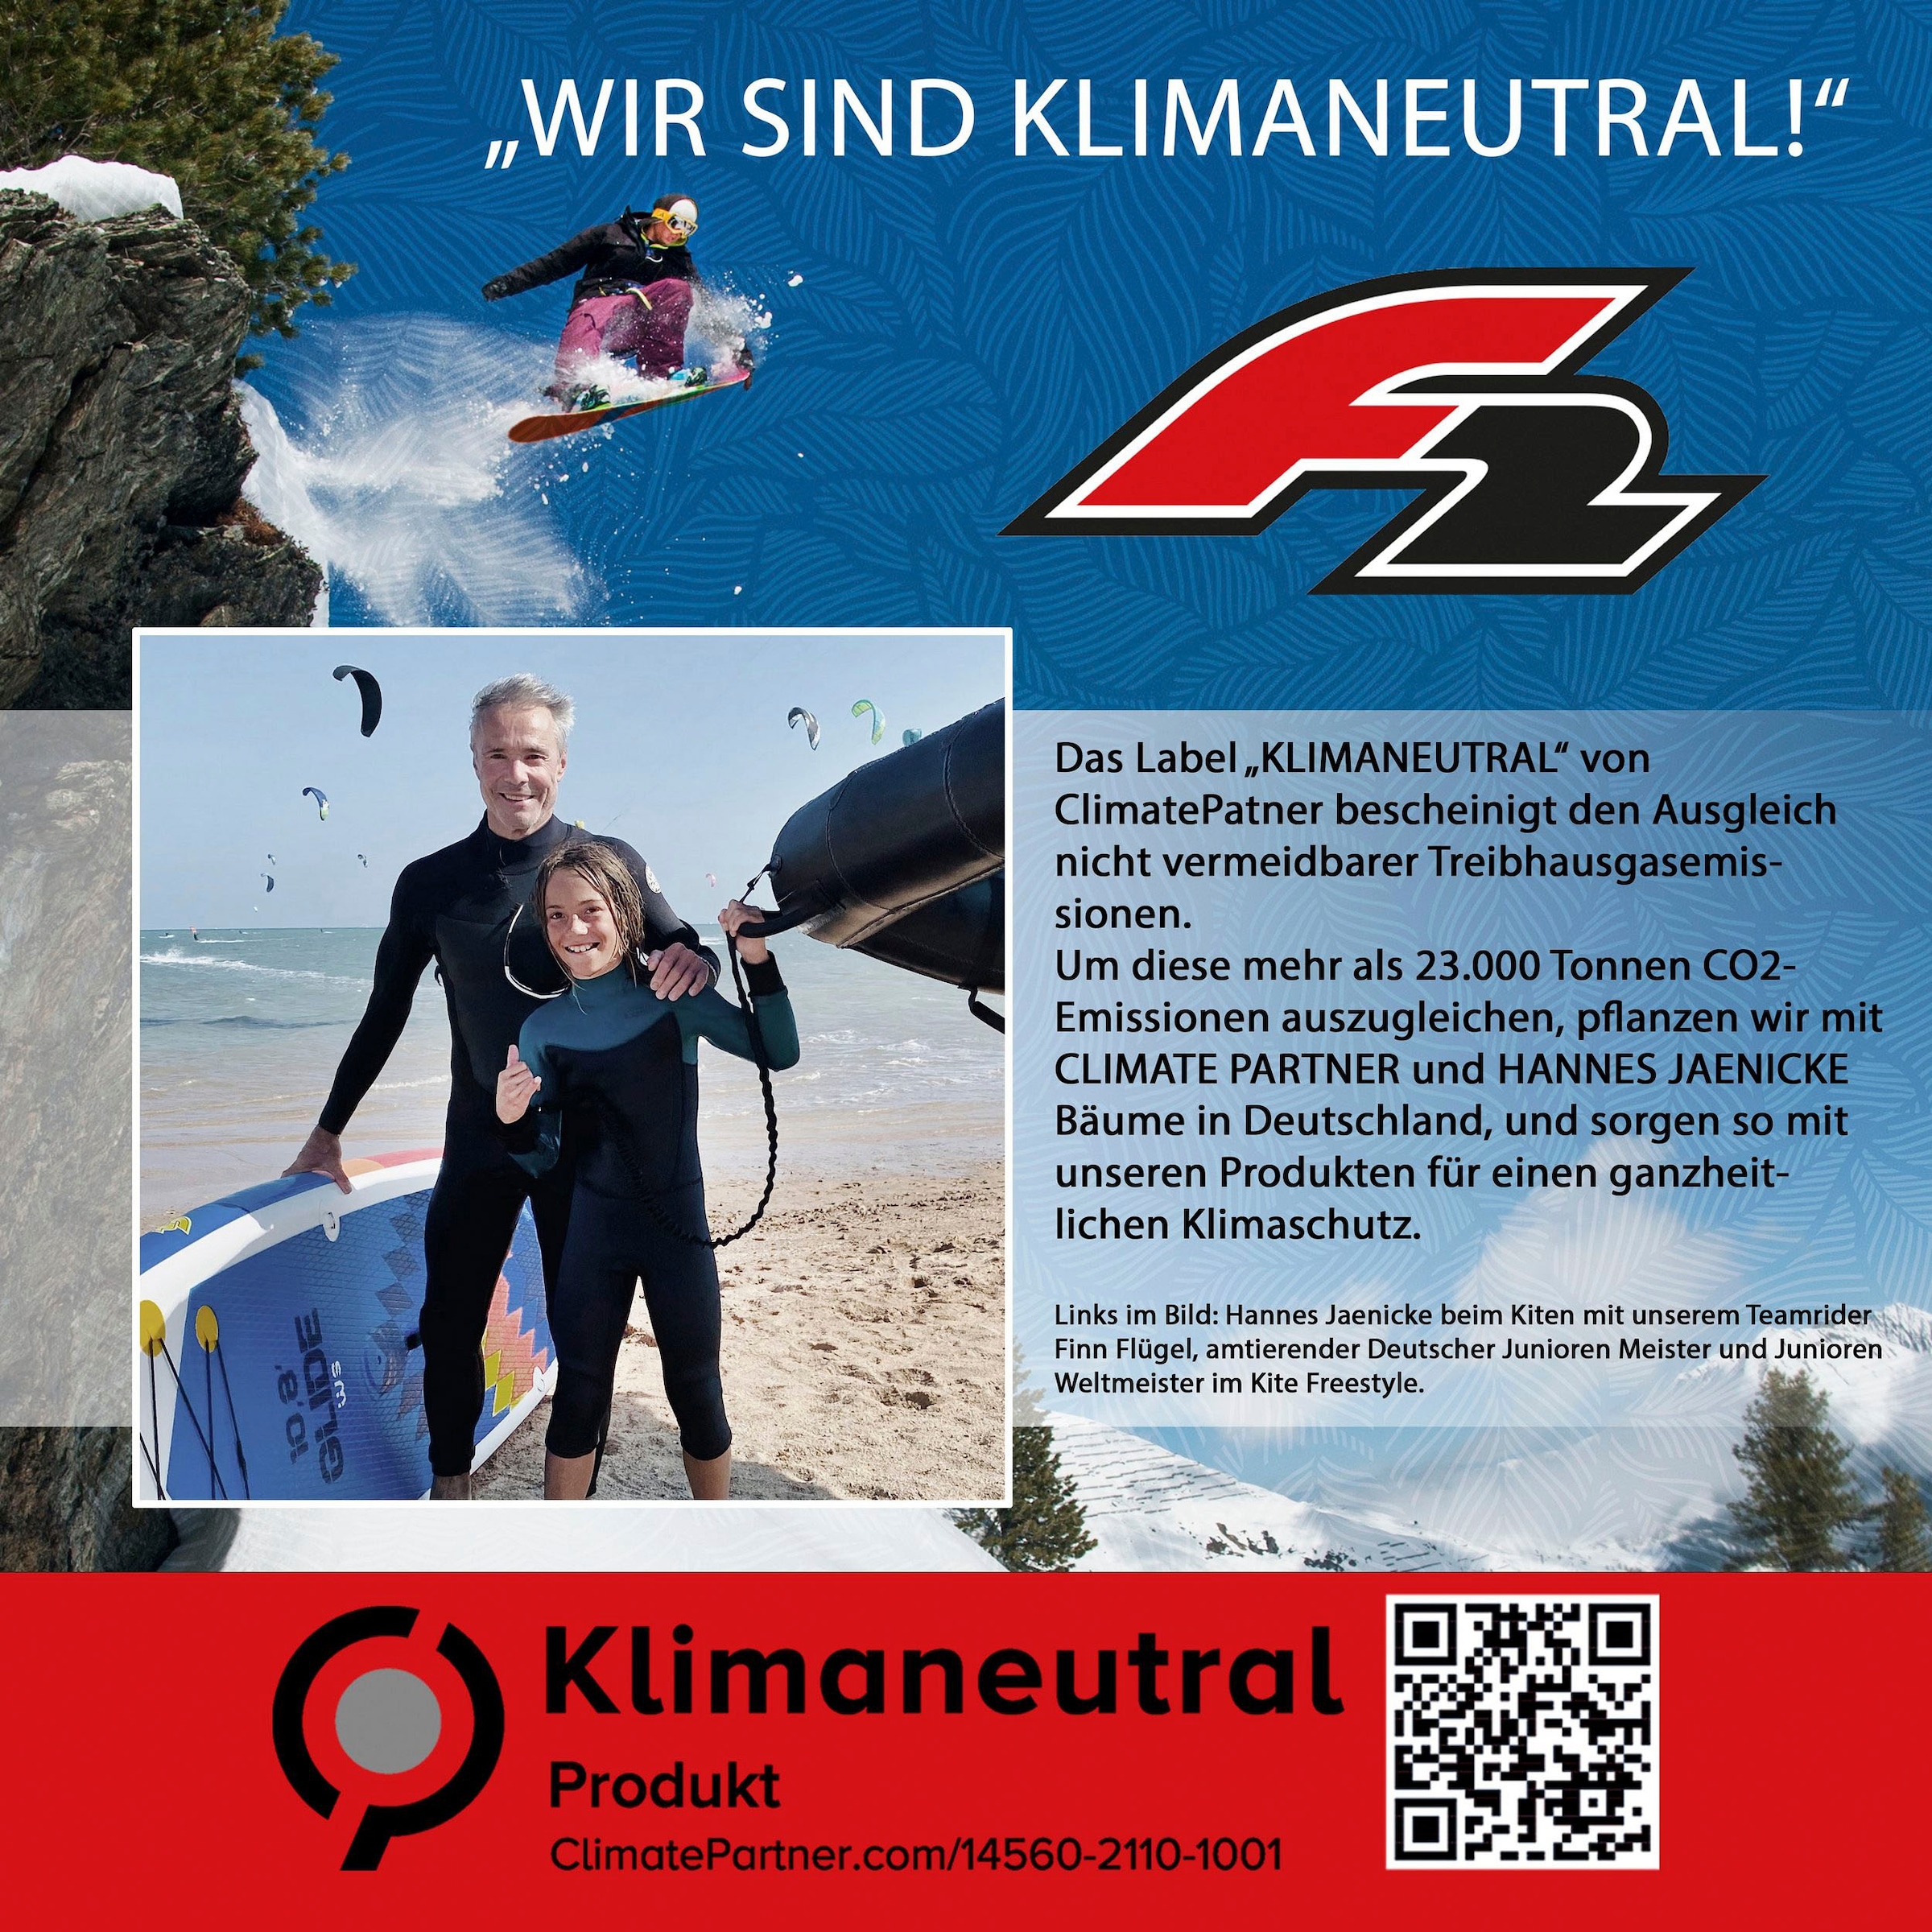 F2 Inflatable 5 Online Shop (Packung, red«, »Aloha OTTO 11,4 im kaufen SUP-Board tlg.)